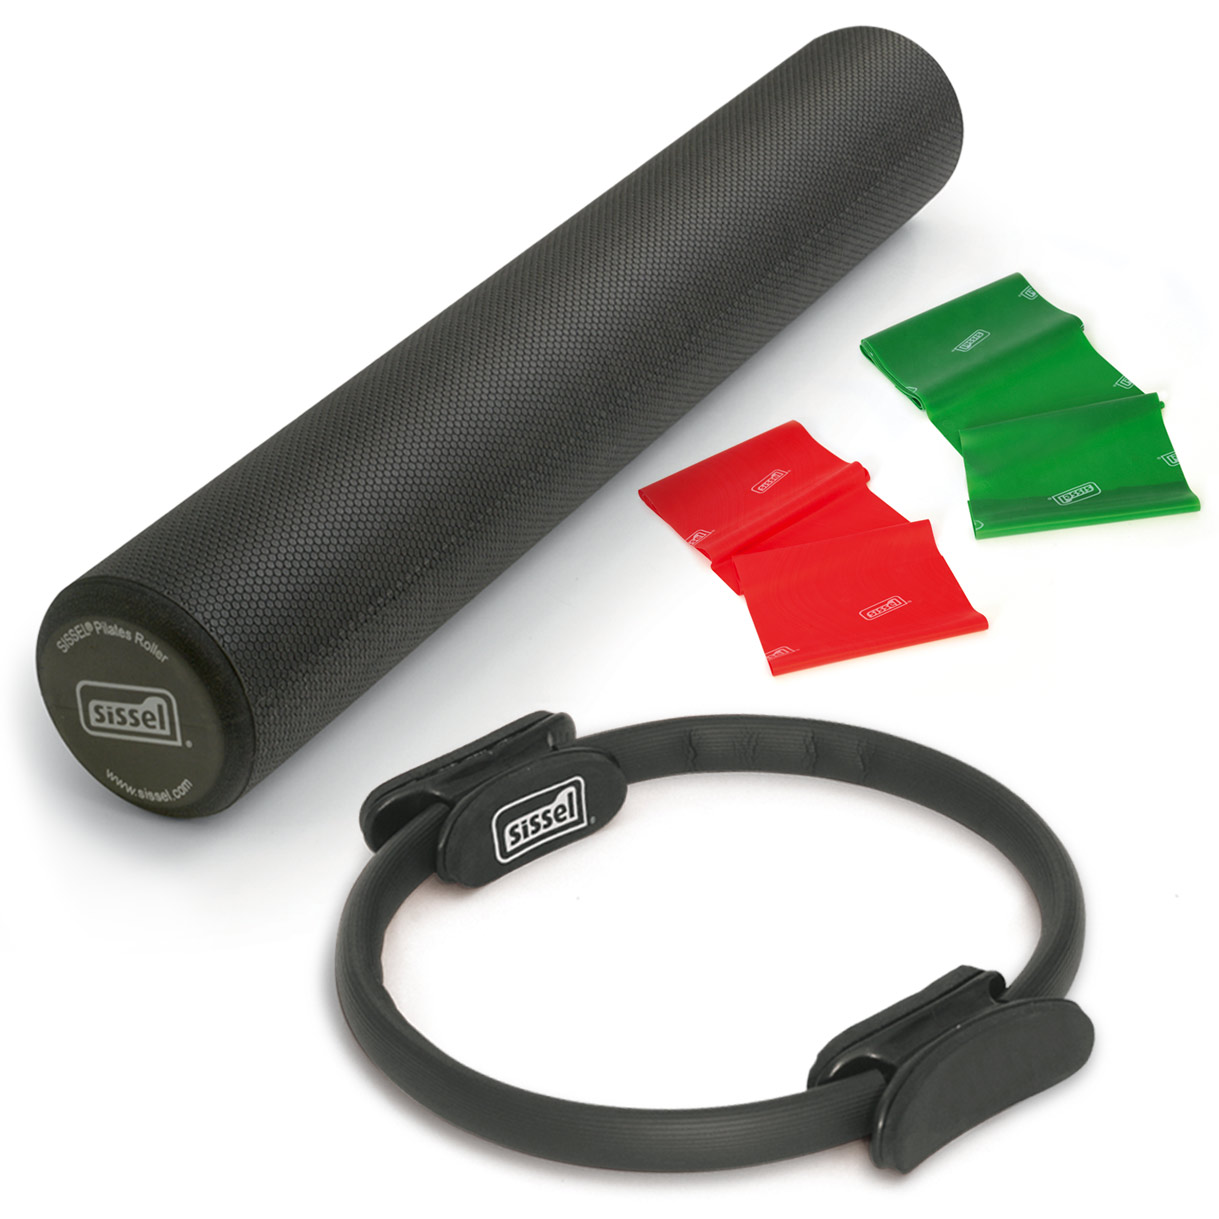 KIT PILATES+ : Roller + Circle + Fitband media + Fitband forte